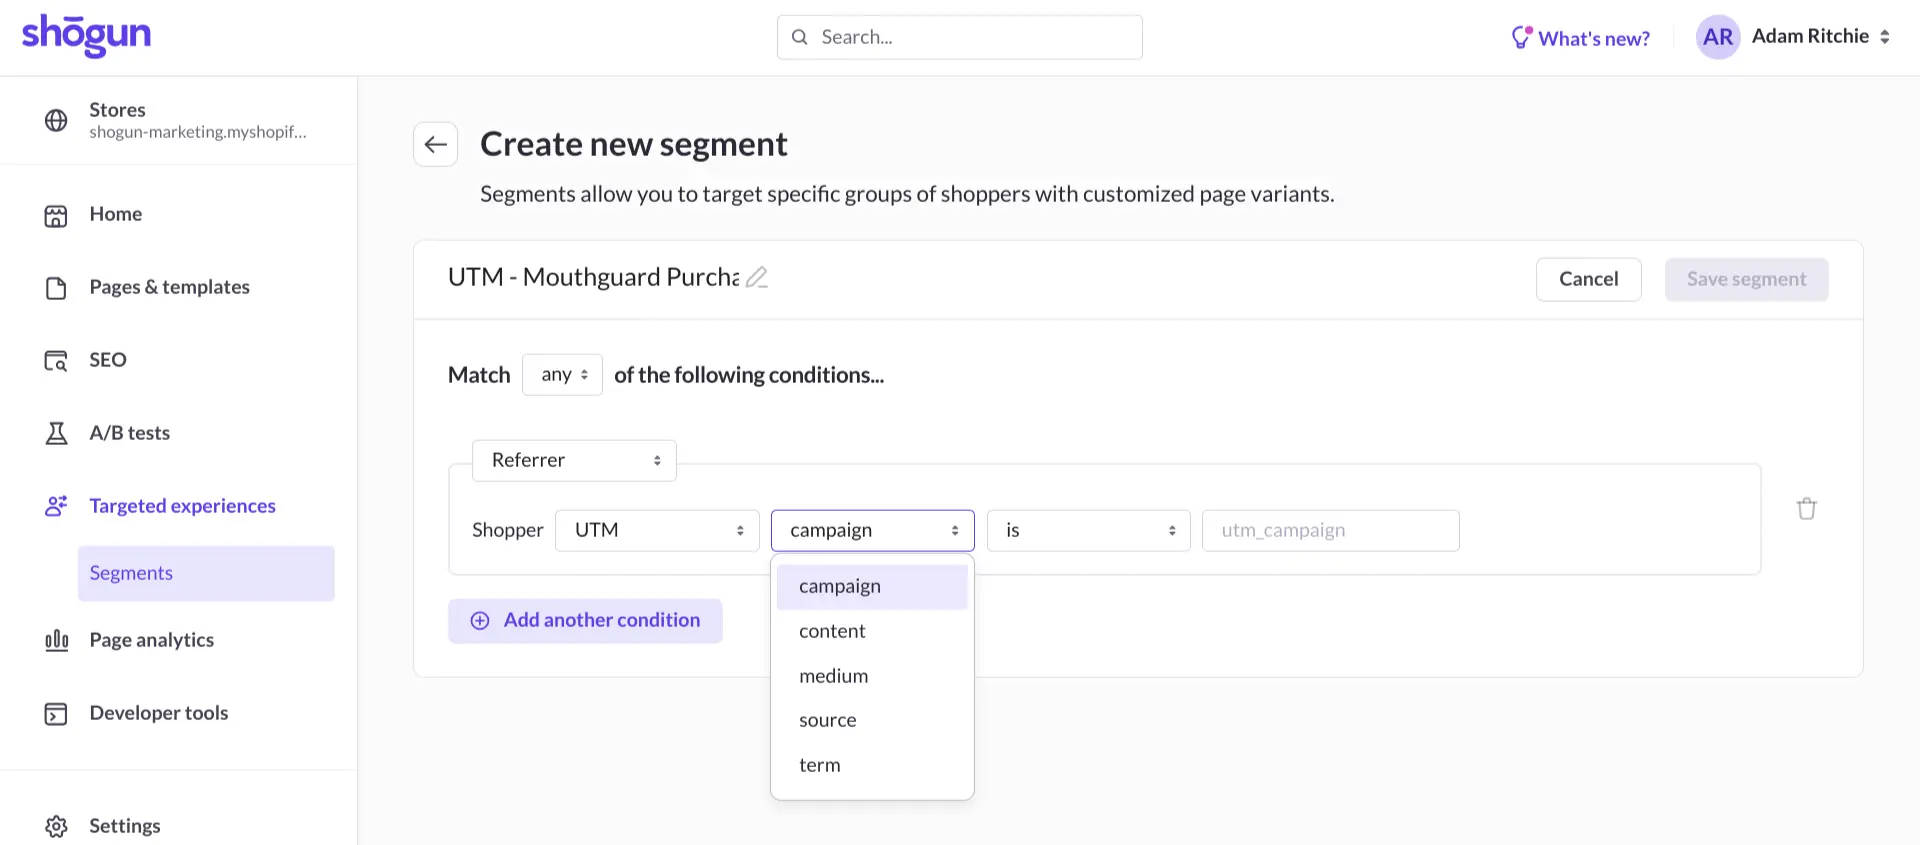 You can use UTM tags to build Targeted Experiences segments.